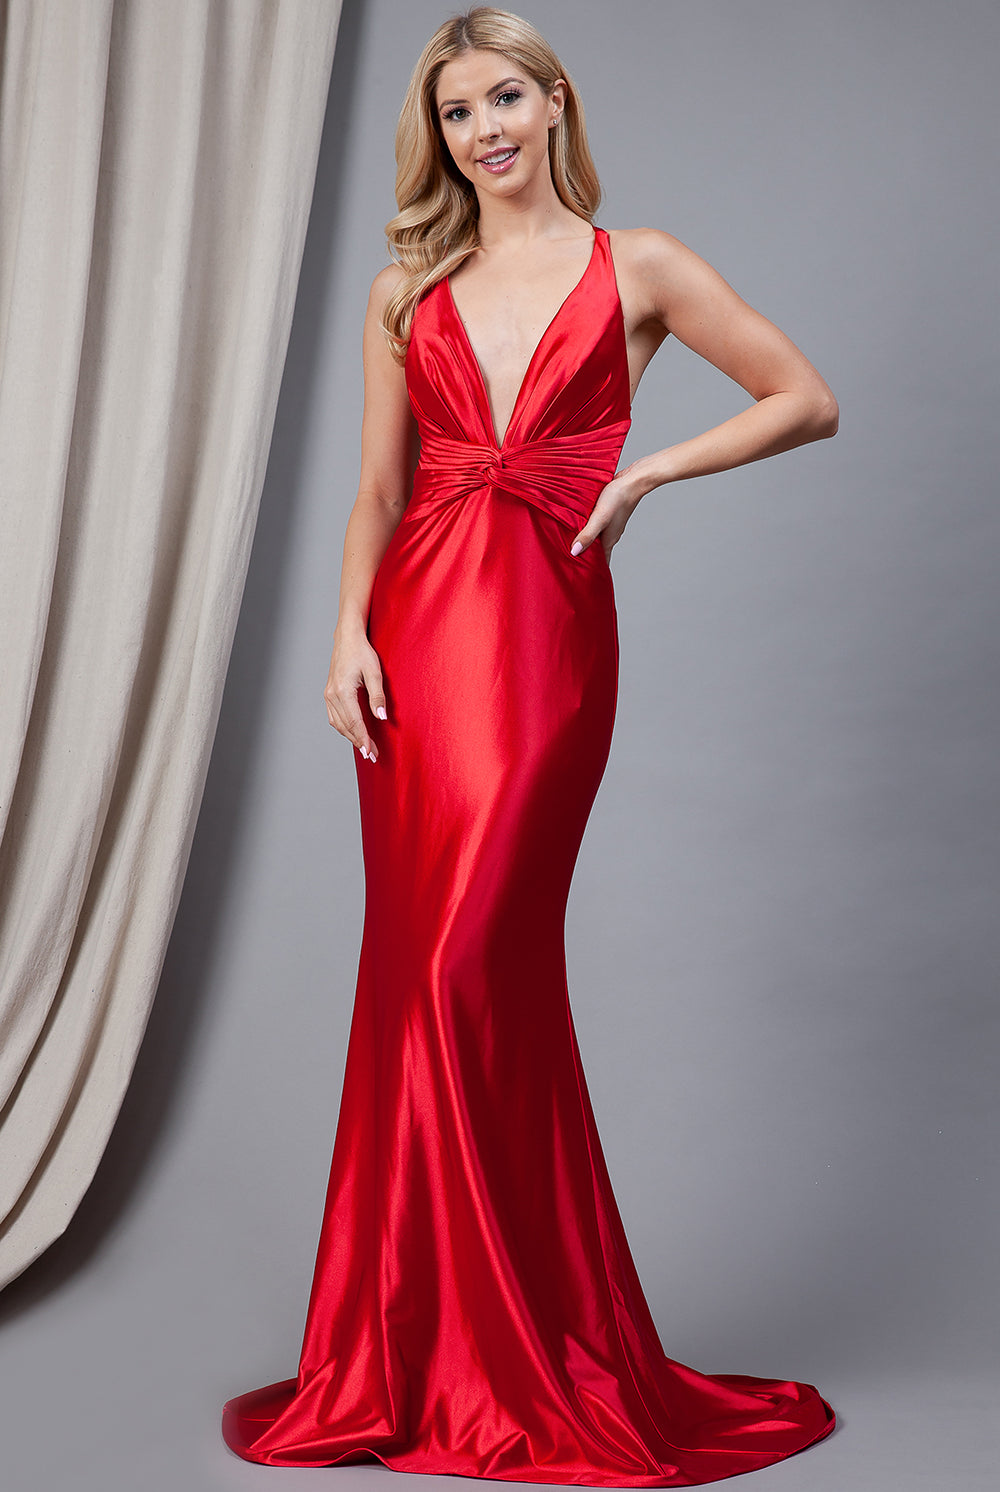 Satin Long Prom Dress with Open Criss Cross Back-smcdress